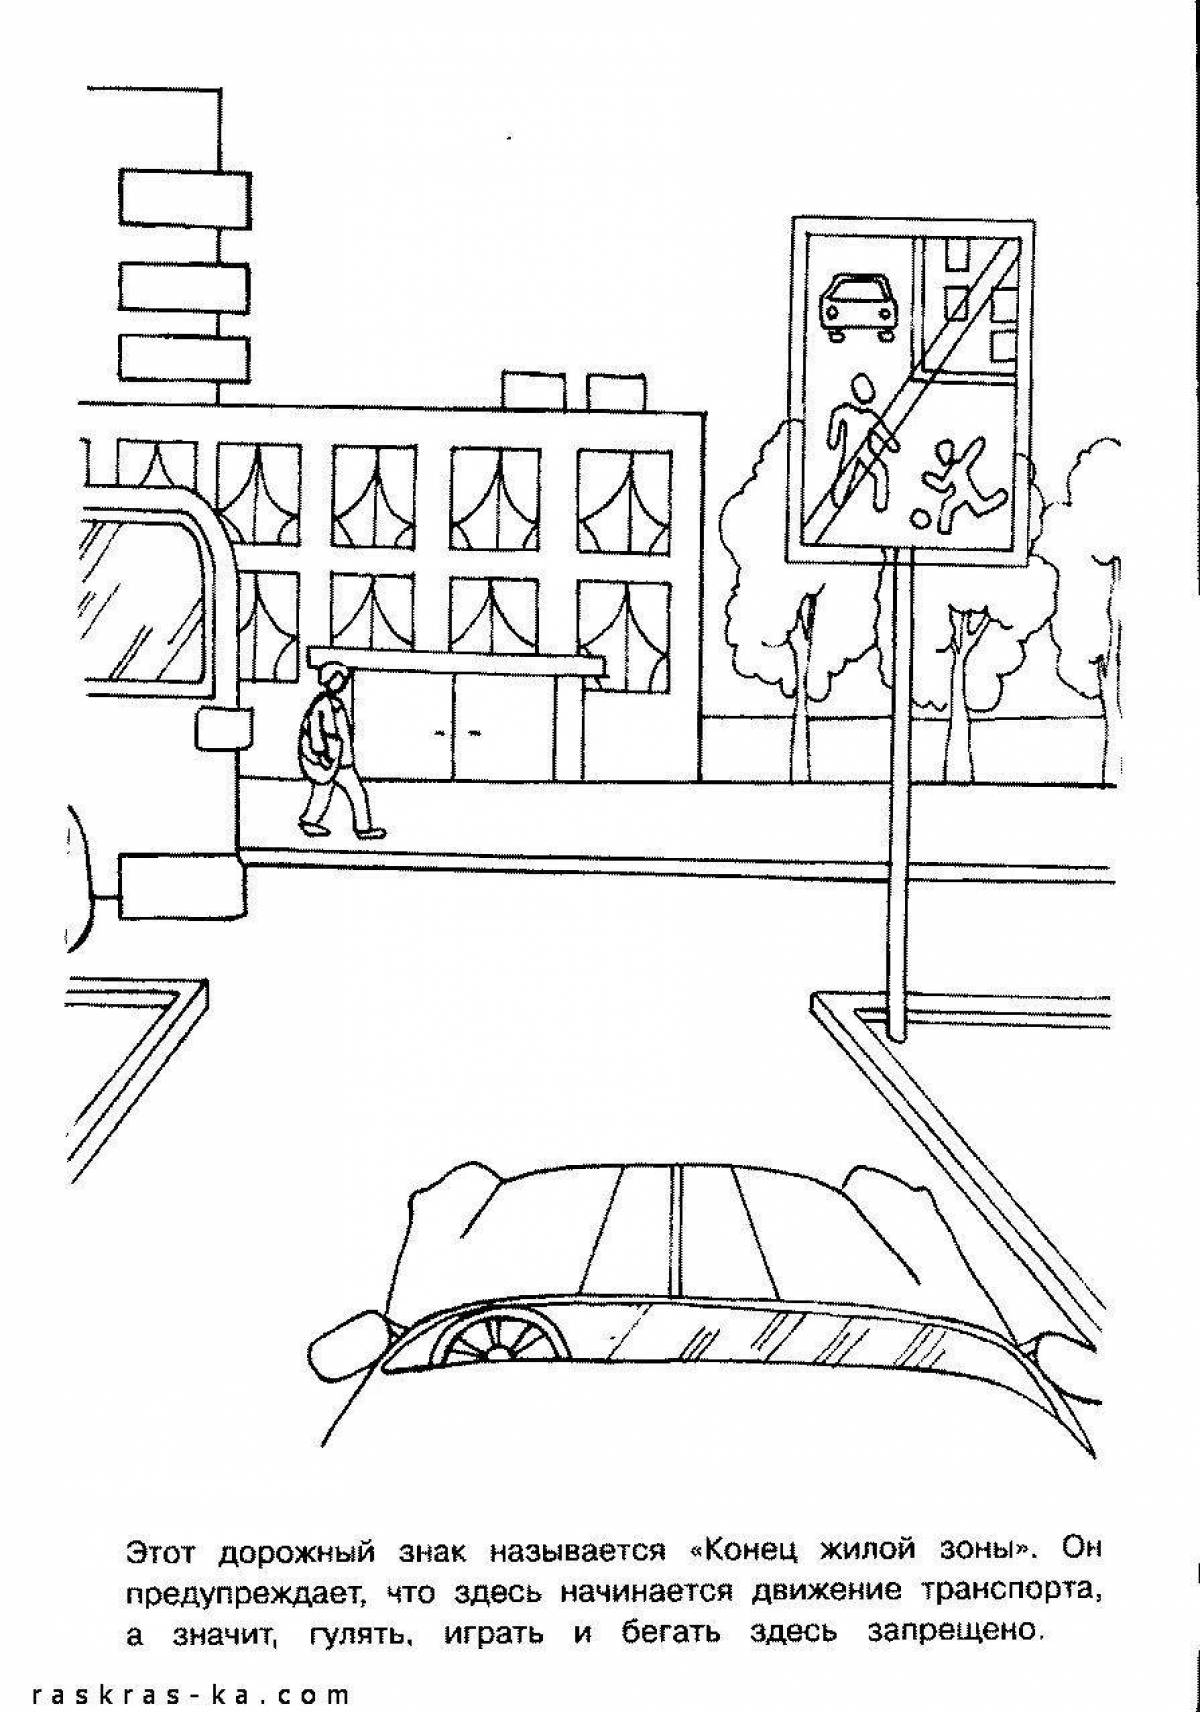 Creative traffic rules coloring for grade 2